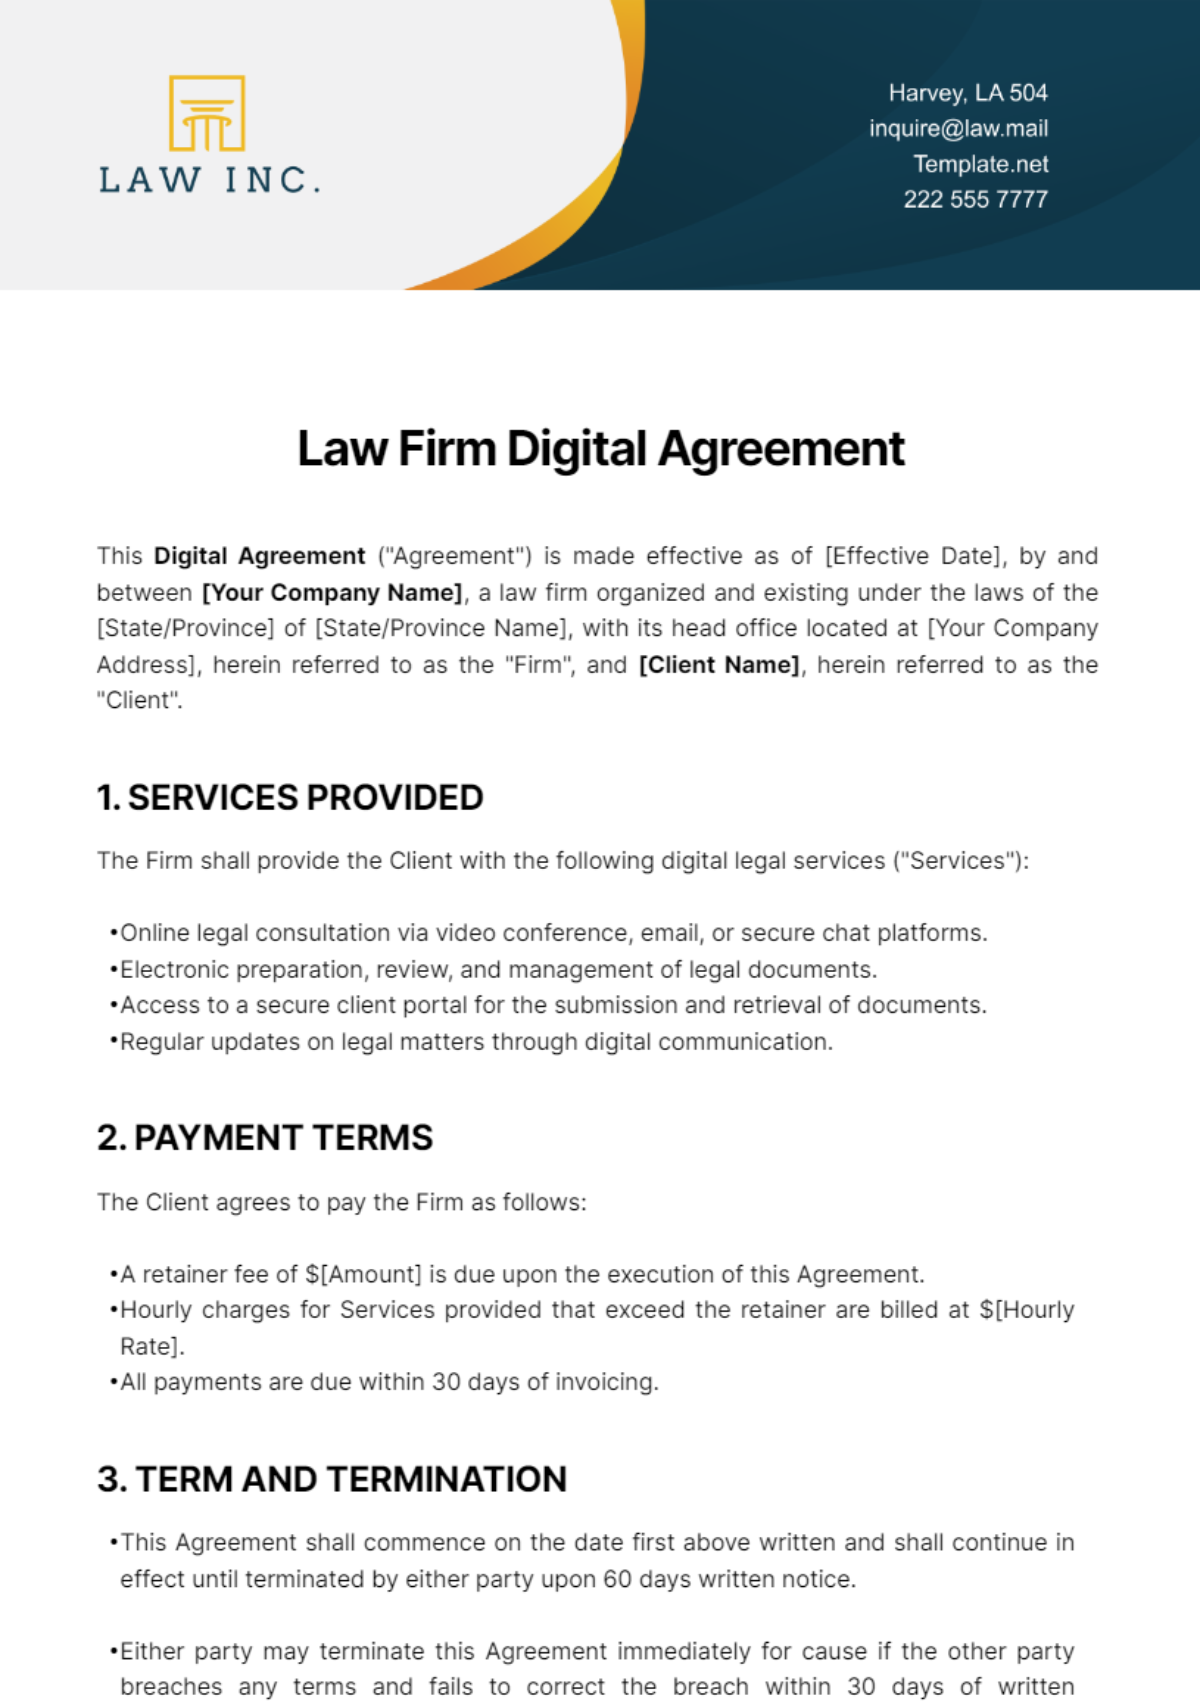 Law Firm Digital Agreement Template